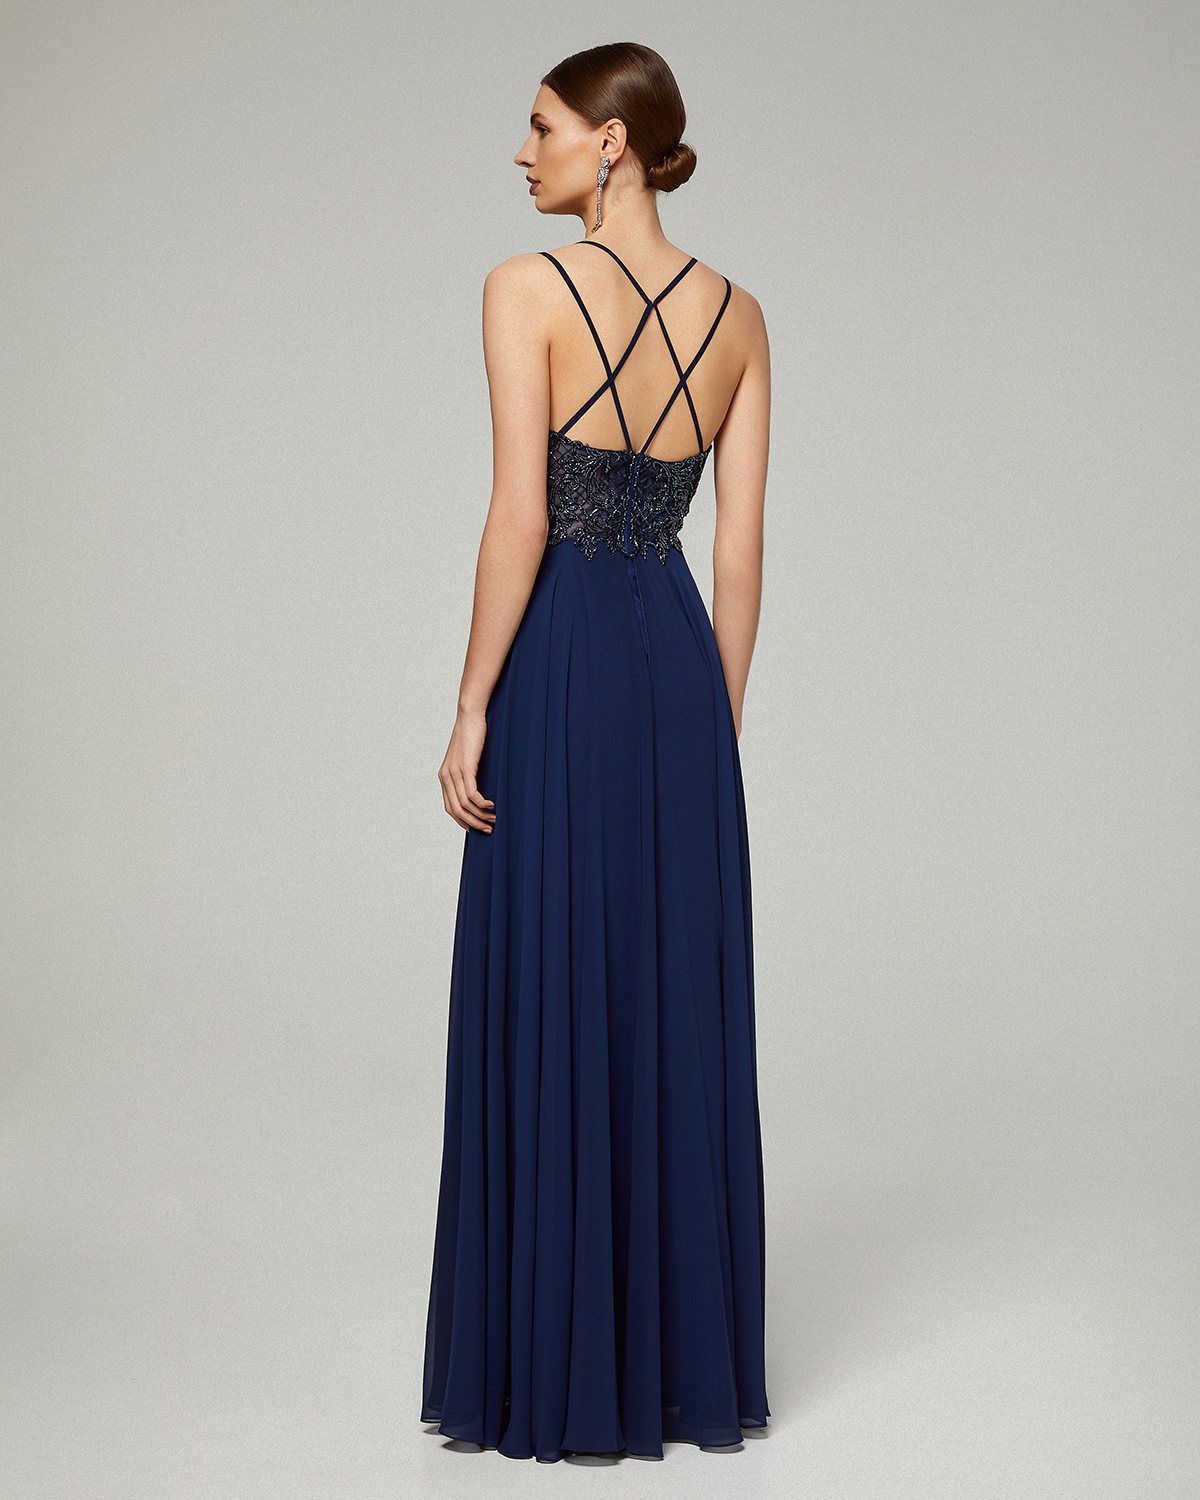 Evening Dresses / Long evening chiffon dress with fully beaded top and straps